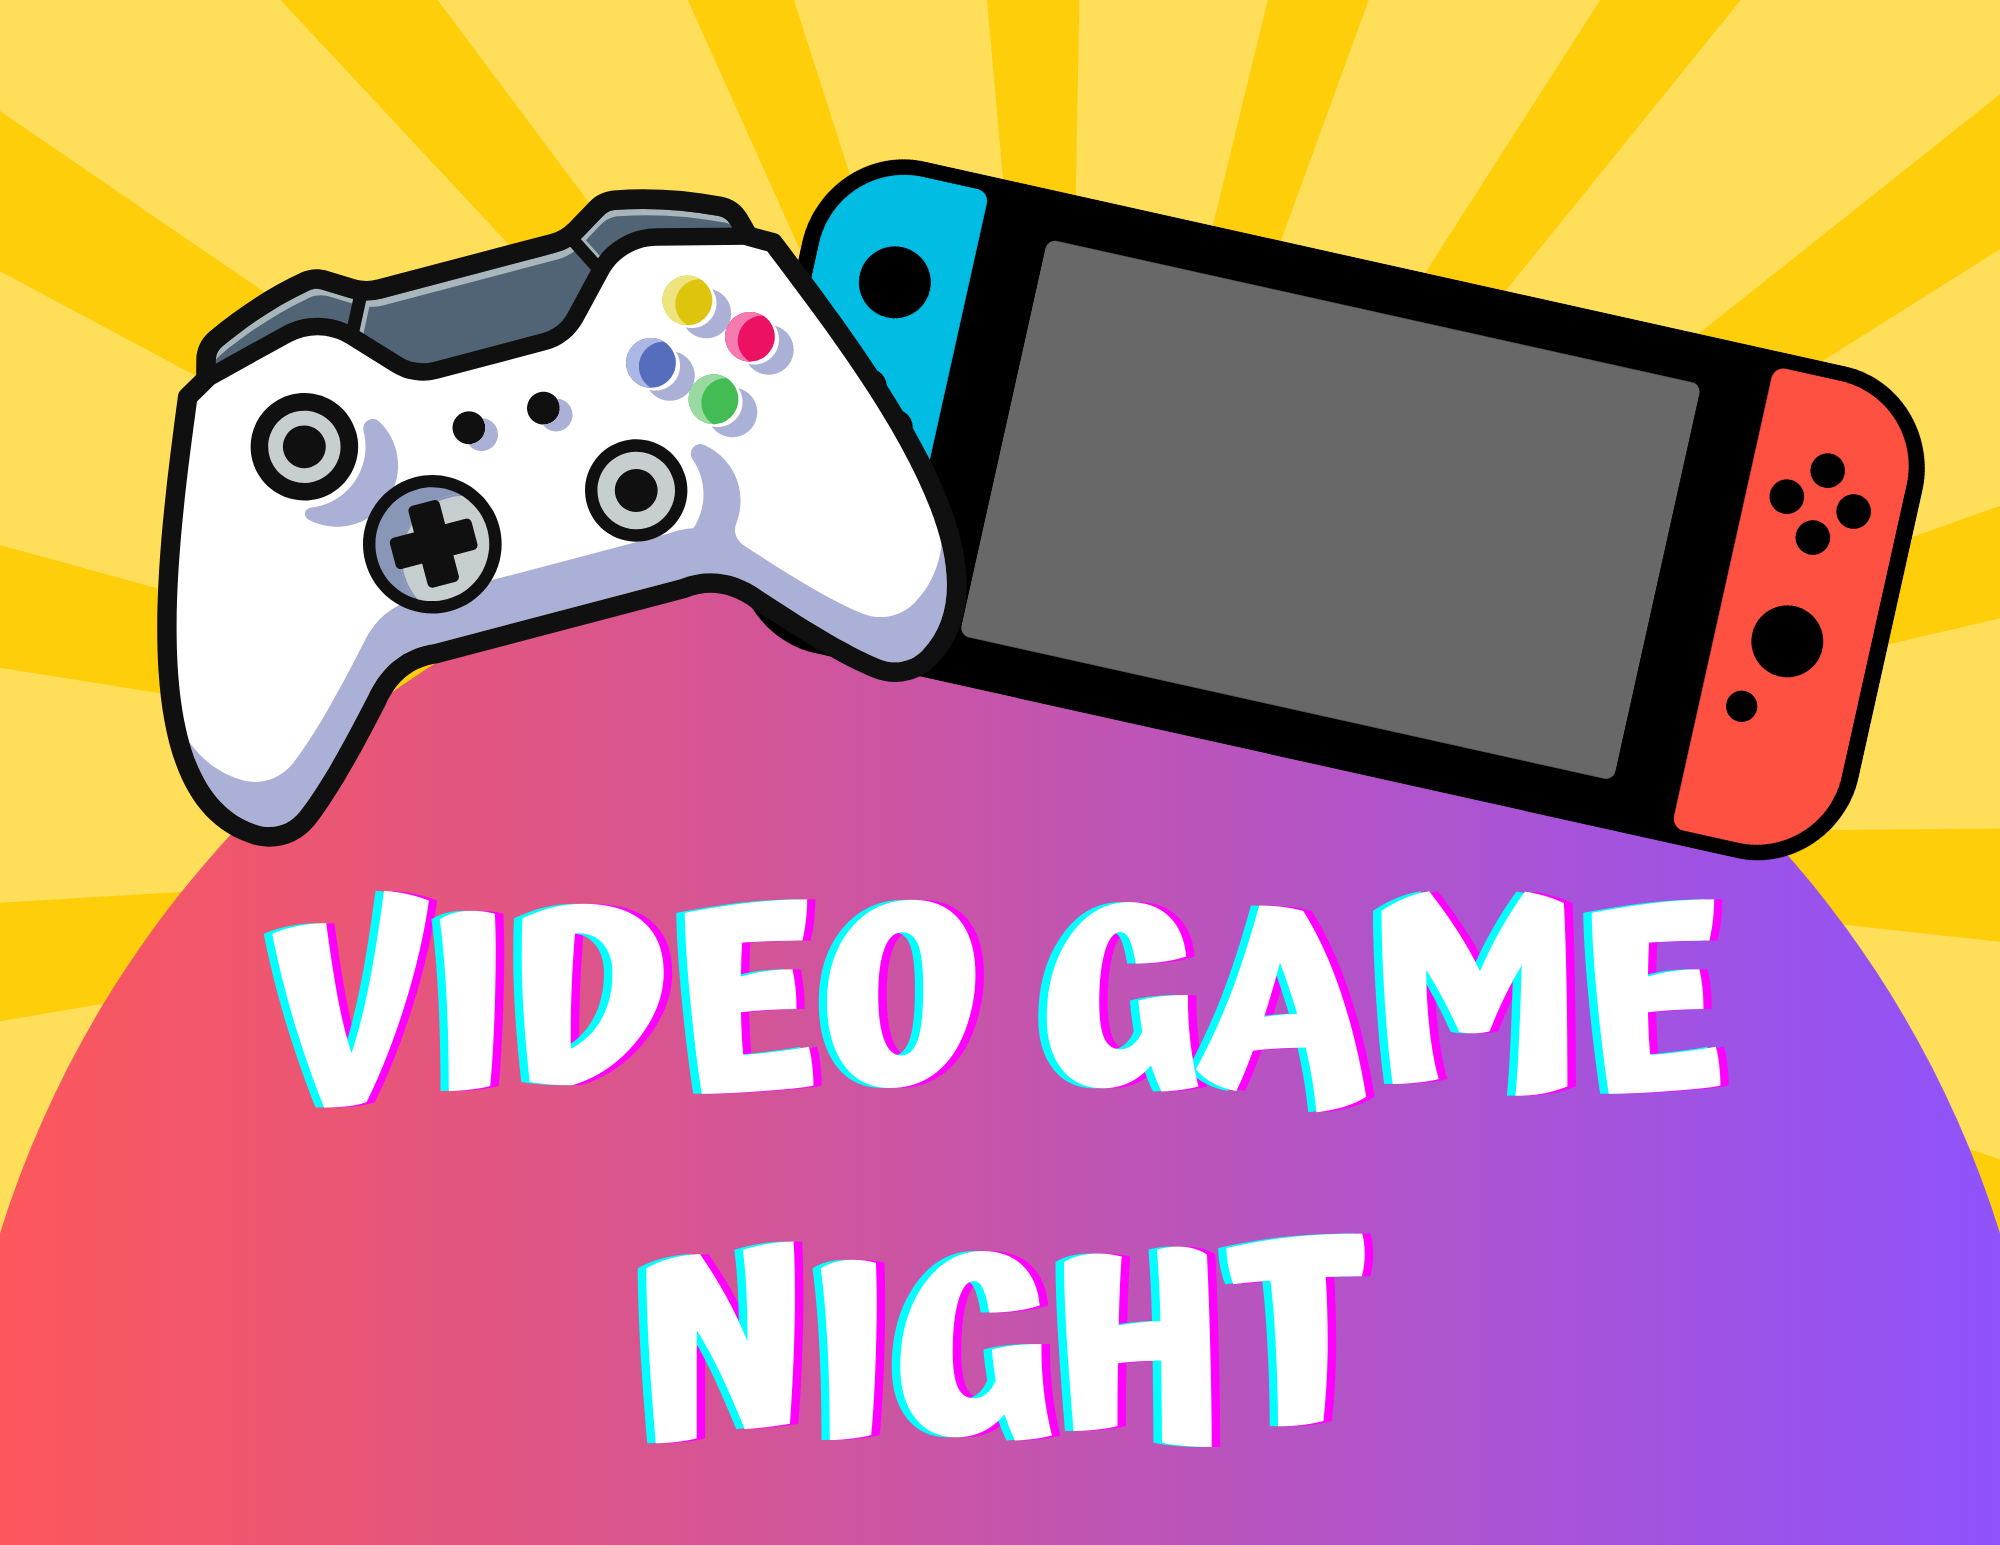 Graphic of xbox one controller and nintendo switch above the words "Video Game Night"